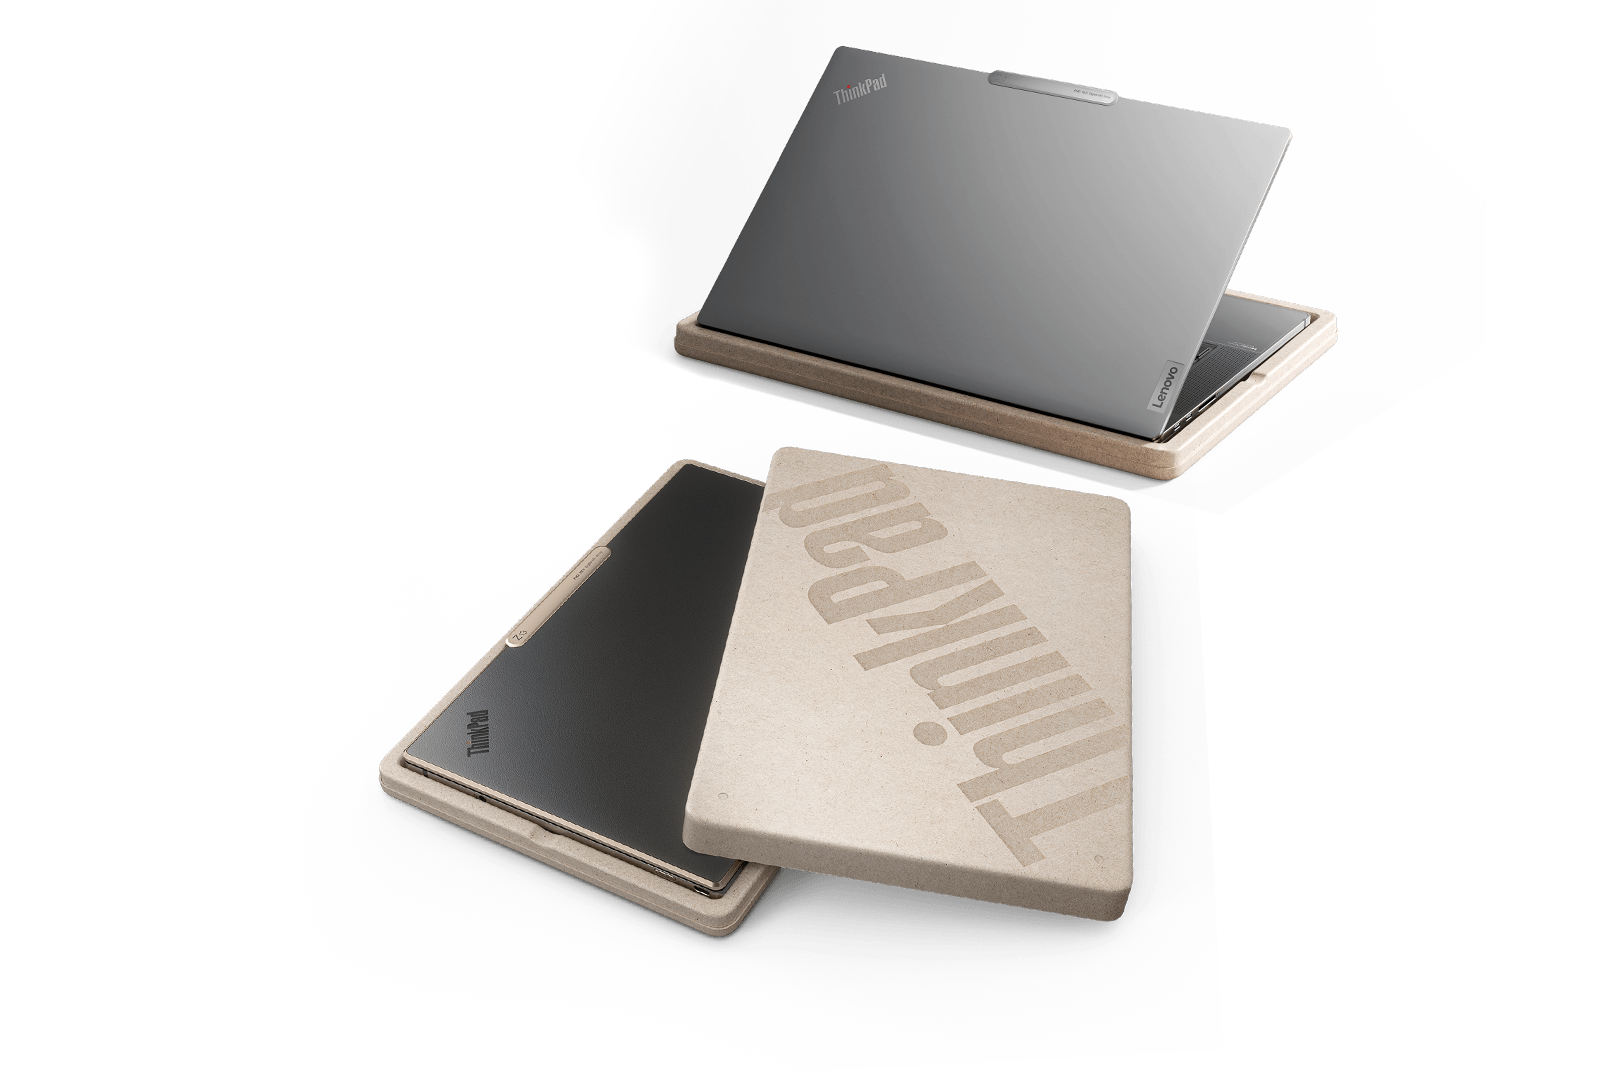 Made from recycled aluminum & PET vegan leather, the Lenovo ThinkPad Z13 and Z16 laptops in shown in 100% rapid-renewable and compostable packaging.